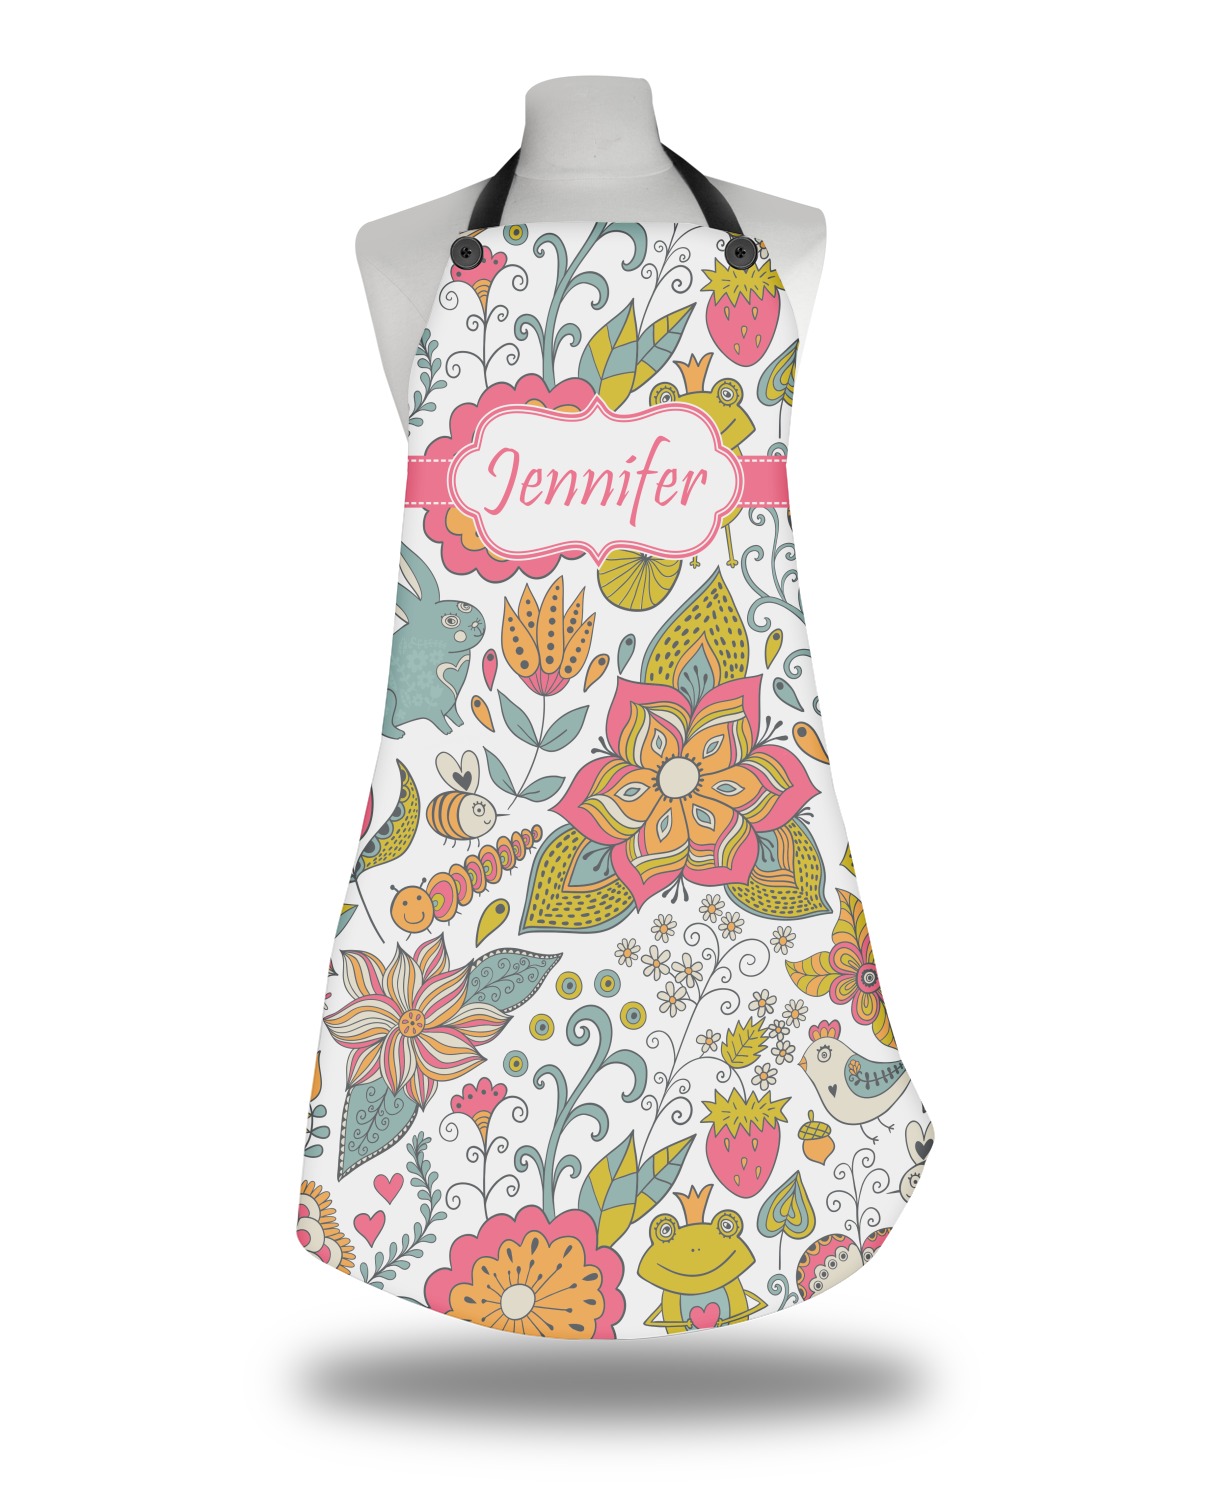 KITCHEN COOKING APRON - PERSONALISED EMBROIDERED CHOOSE NAME & INITIAL |  eBay